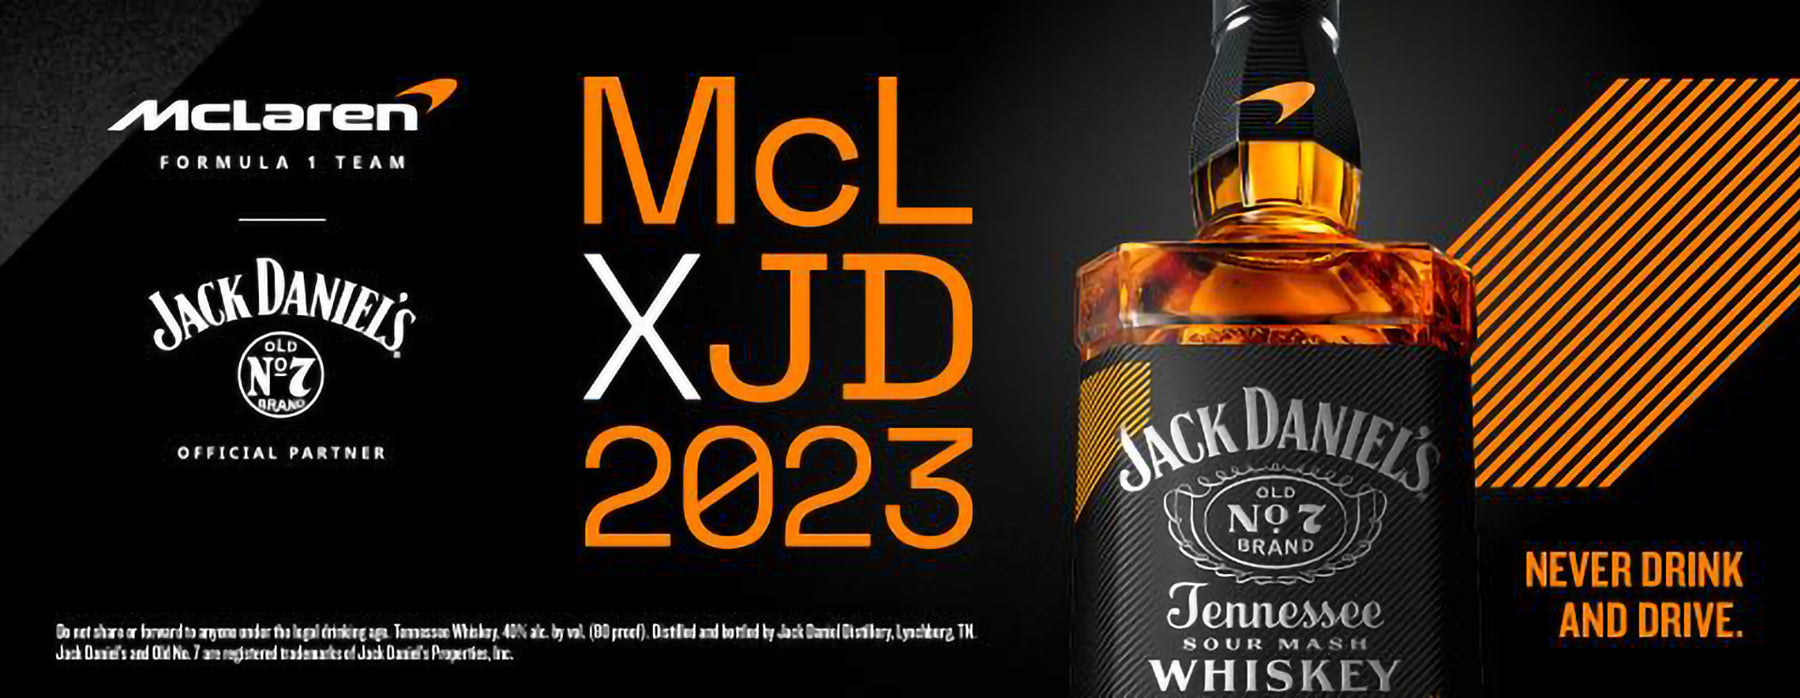 Revving Up the Spirits: Jack Daniel’s and McLaren F1 Unite for a Limited Edition Release | Boozebud 